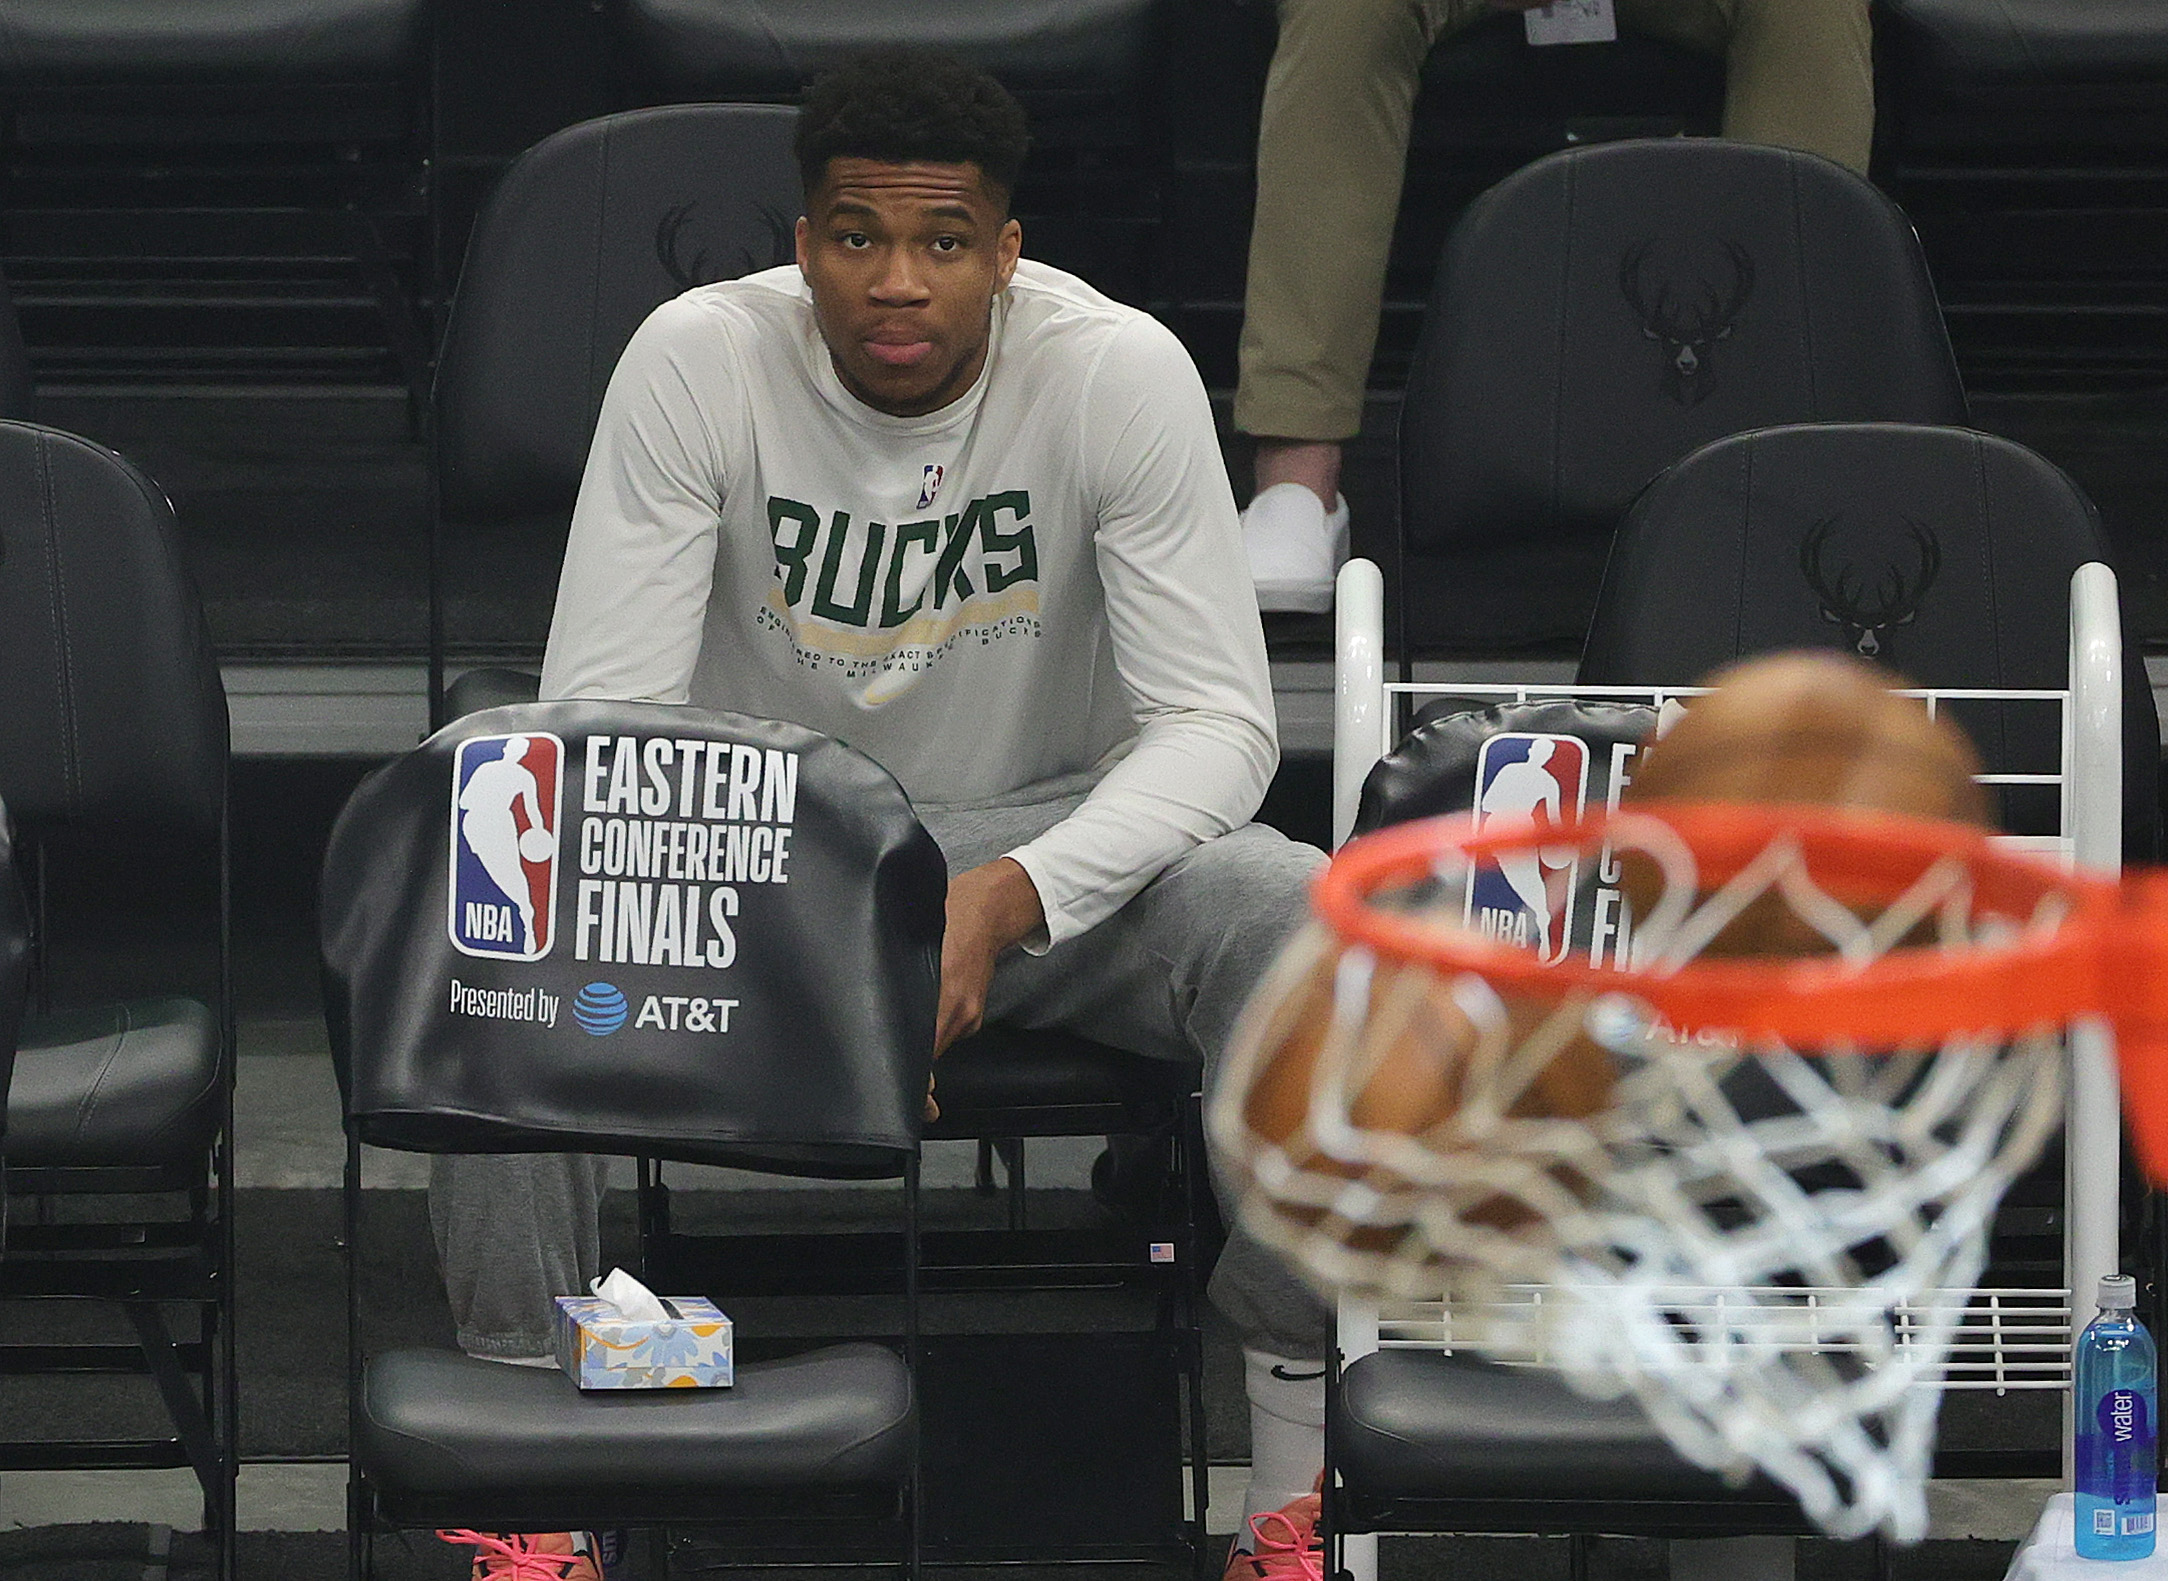 Report: Bucks' Giannis Antetokounmpo Could Return from Knee Injury for ECF Game 7